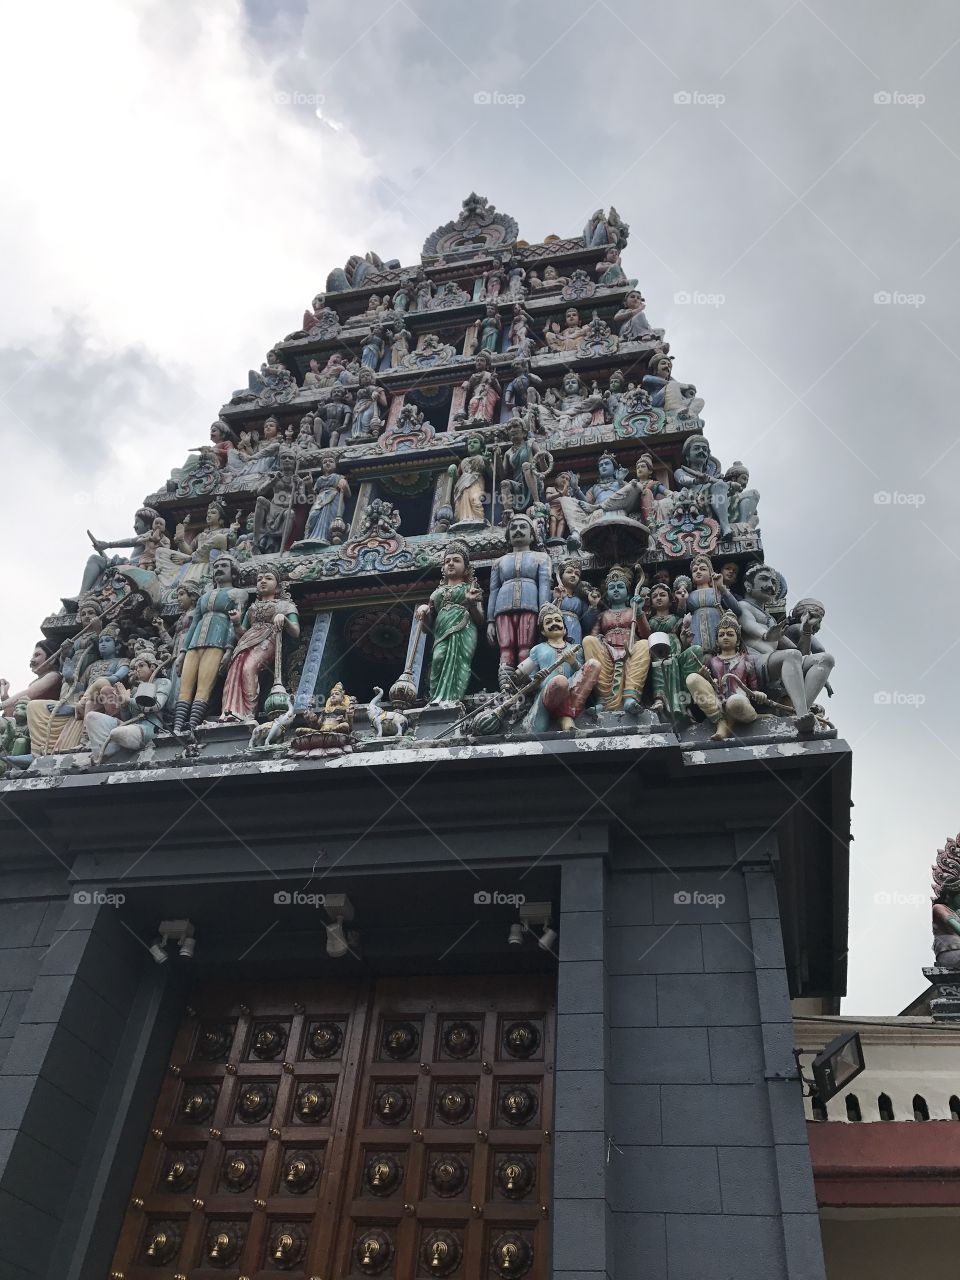 A temple in singapore. Learning about cultures.